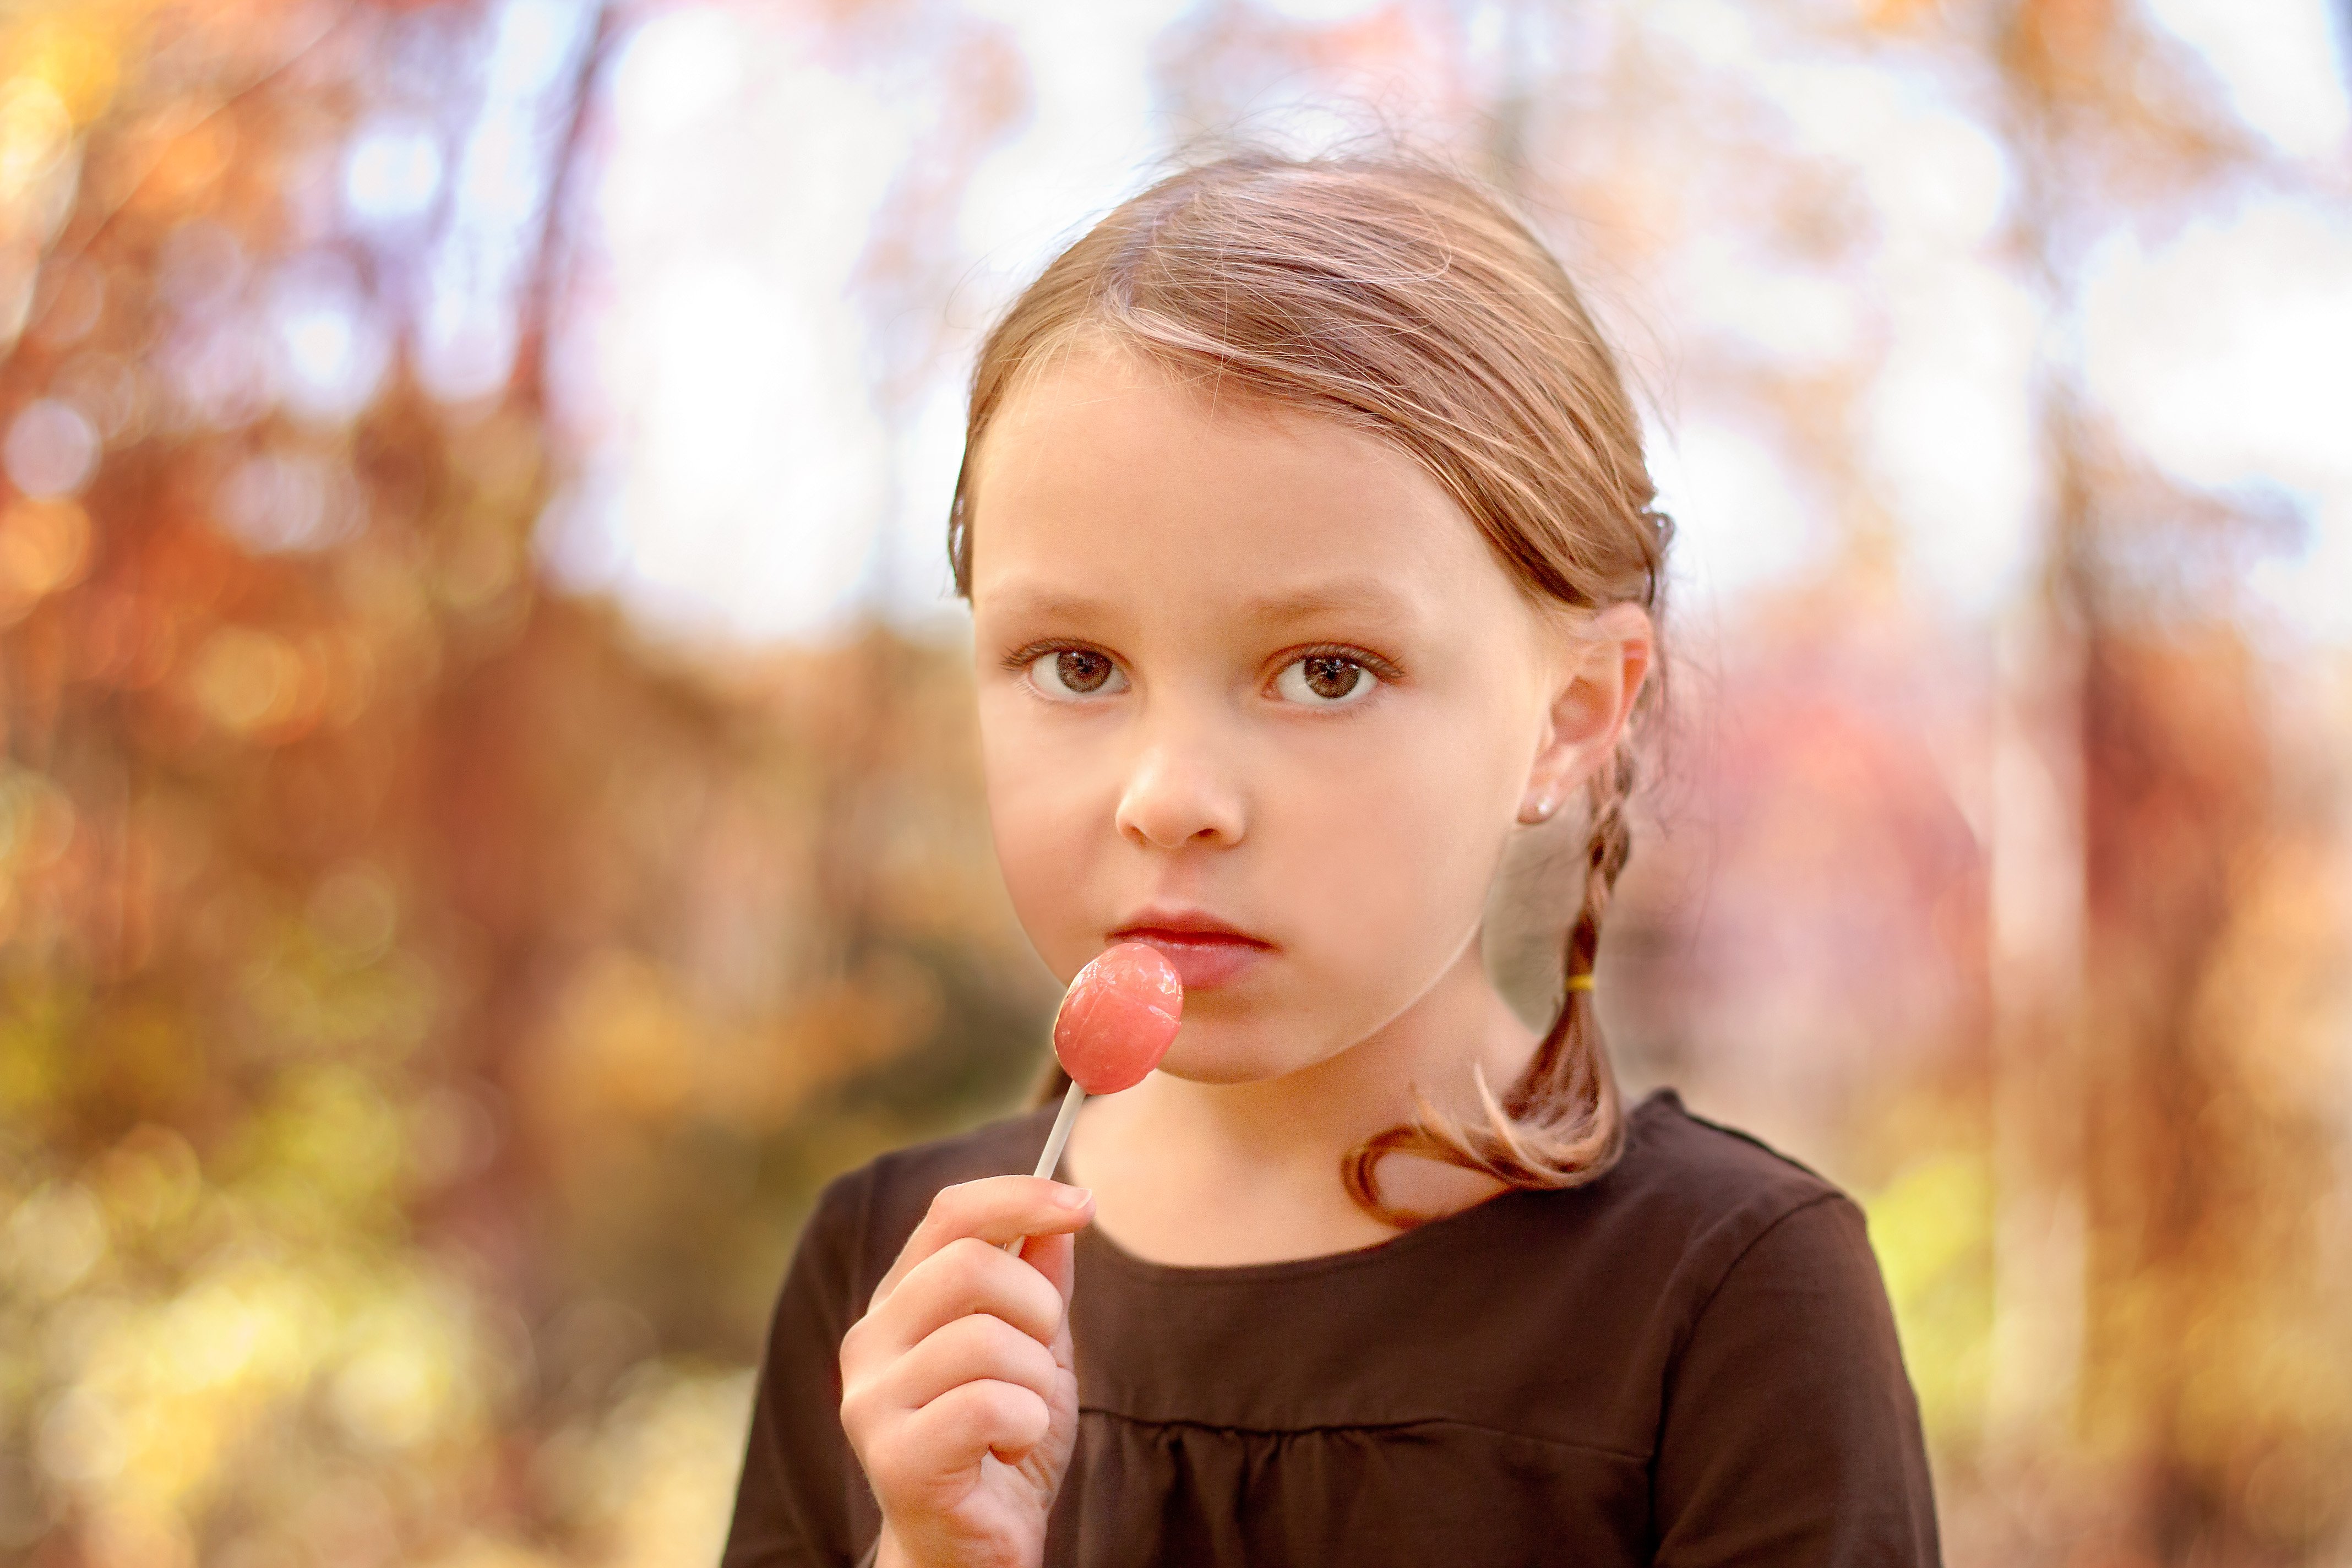 young girl with a serious angelic look eating a pink lollipop with fall colors behind her